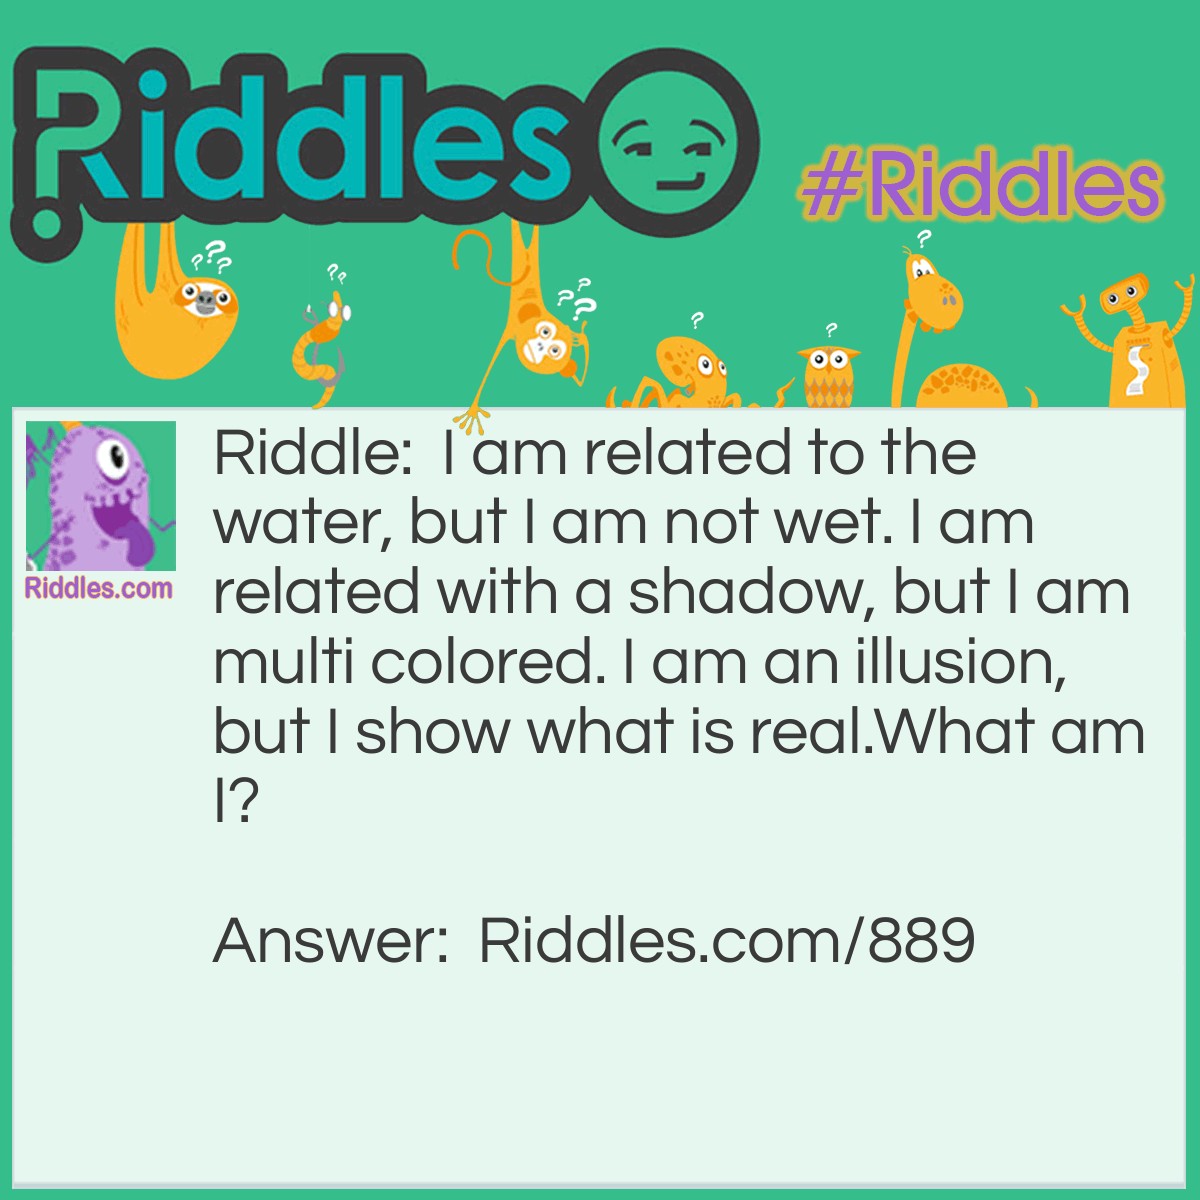 Riddle: I am related to the water, but I am not wet. I am related with a shadow, but I am multi colored. I am an illusion, but I show what is real.
What am I? Answer: A mirror!